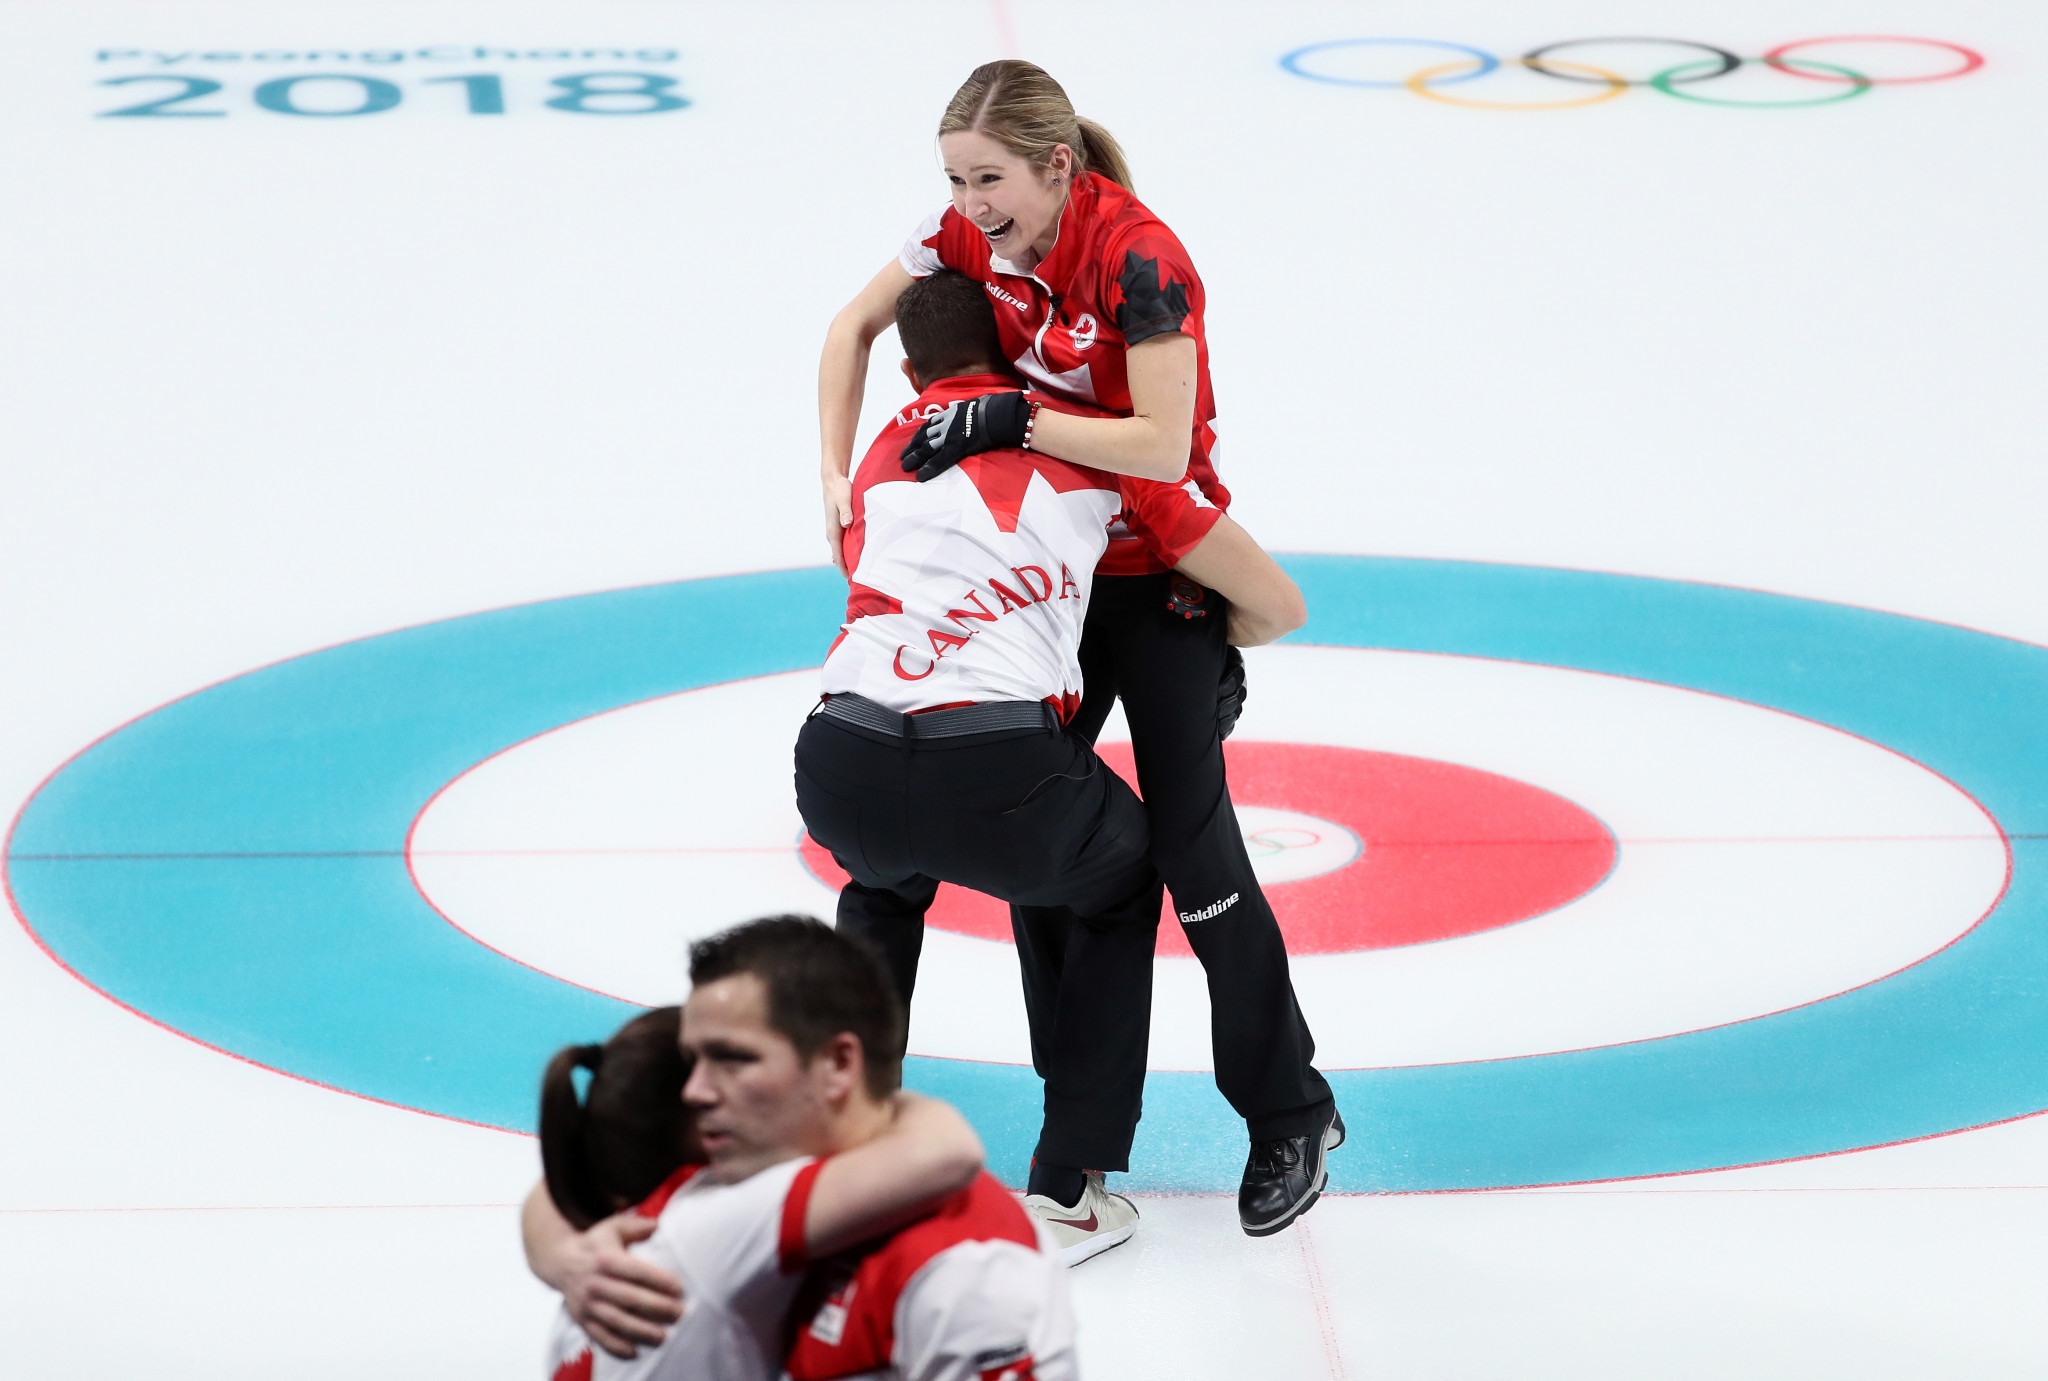 Canada win first Olympic mixed doubles curling title as action continues at Pyeongchang 2018